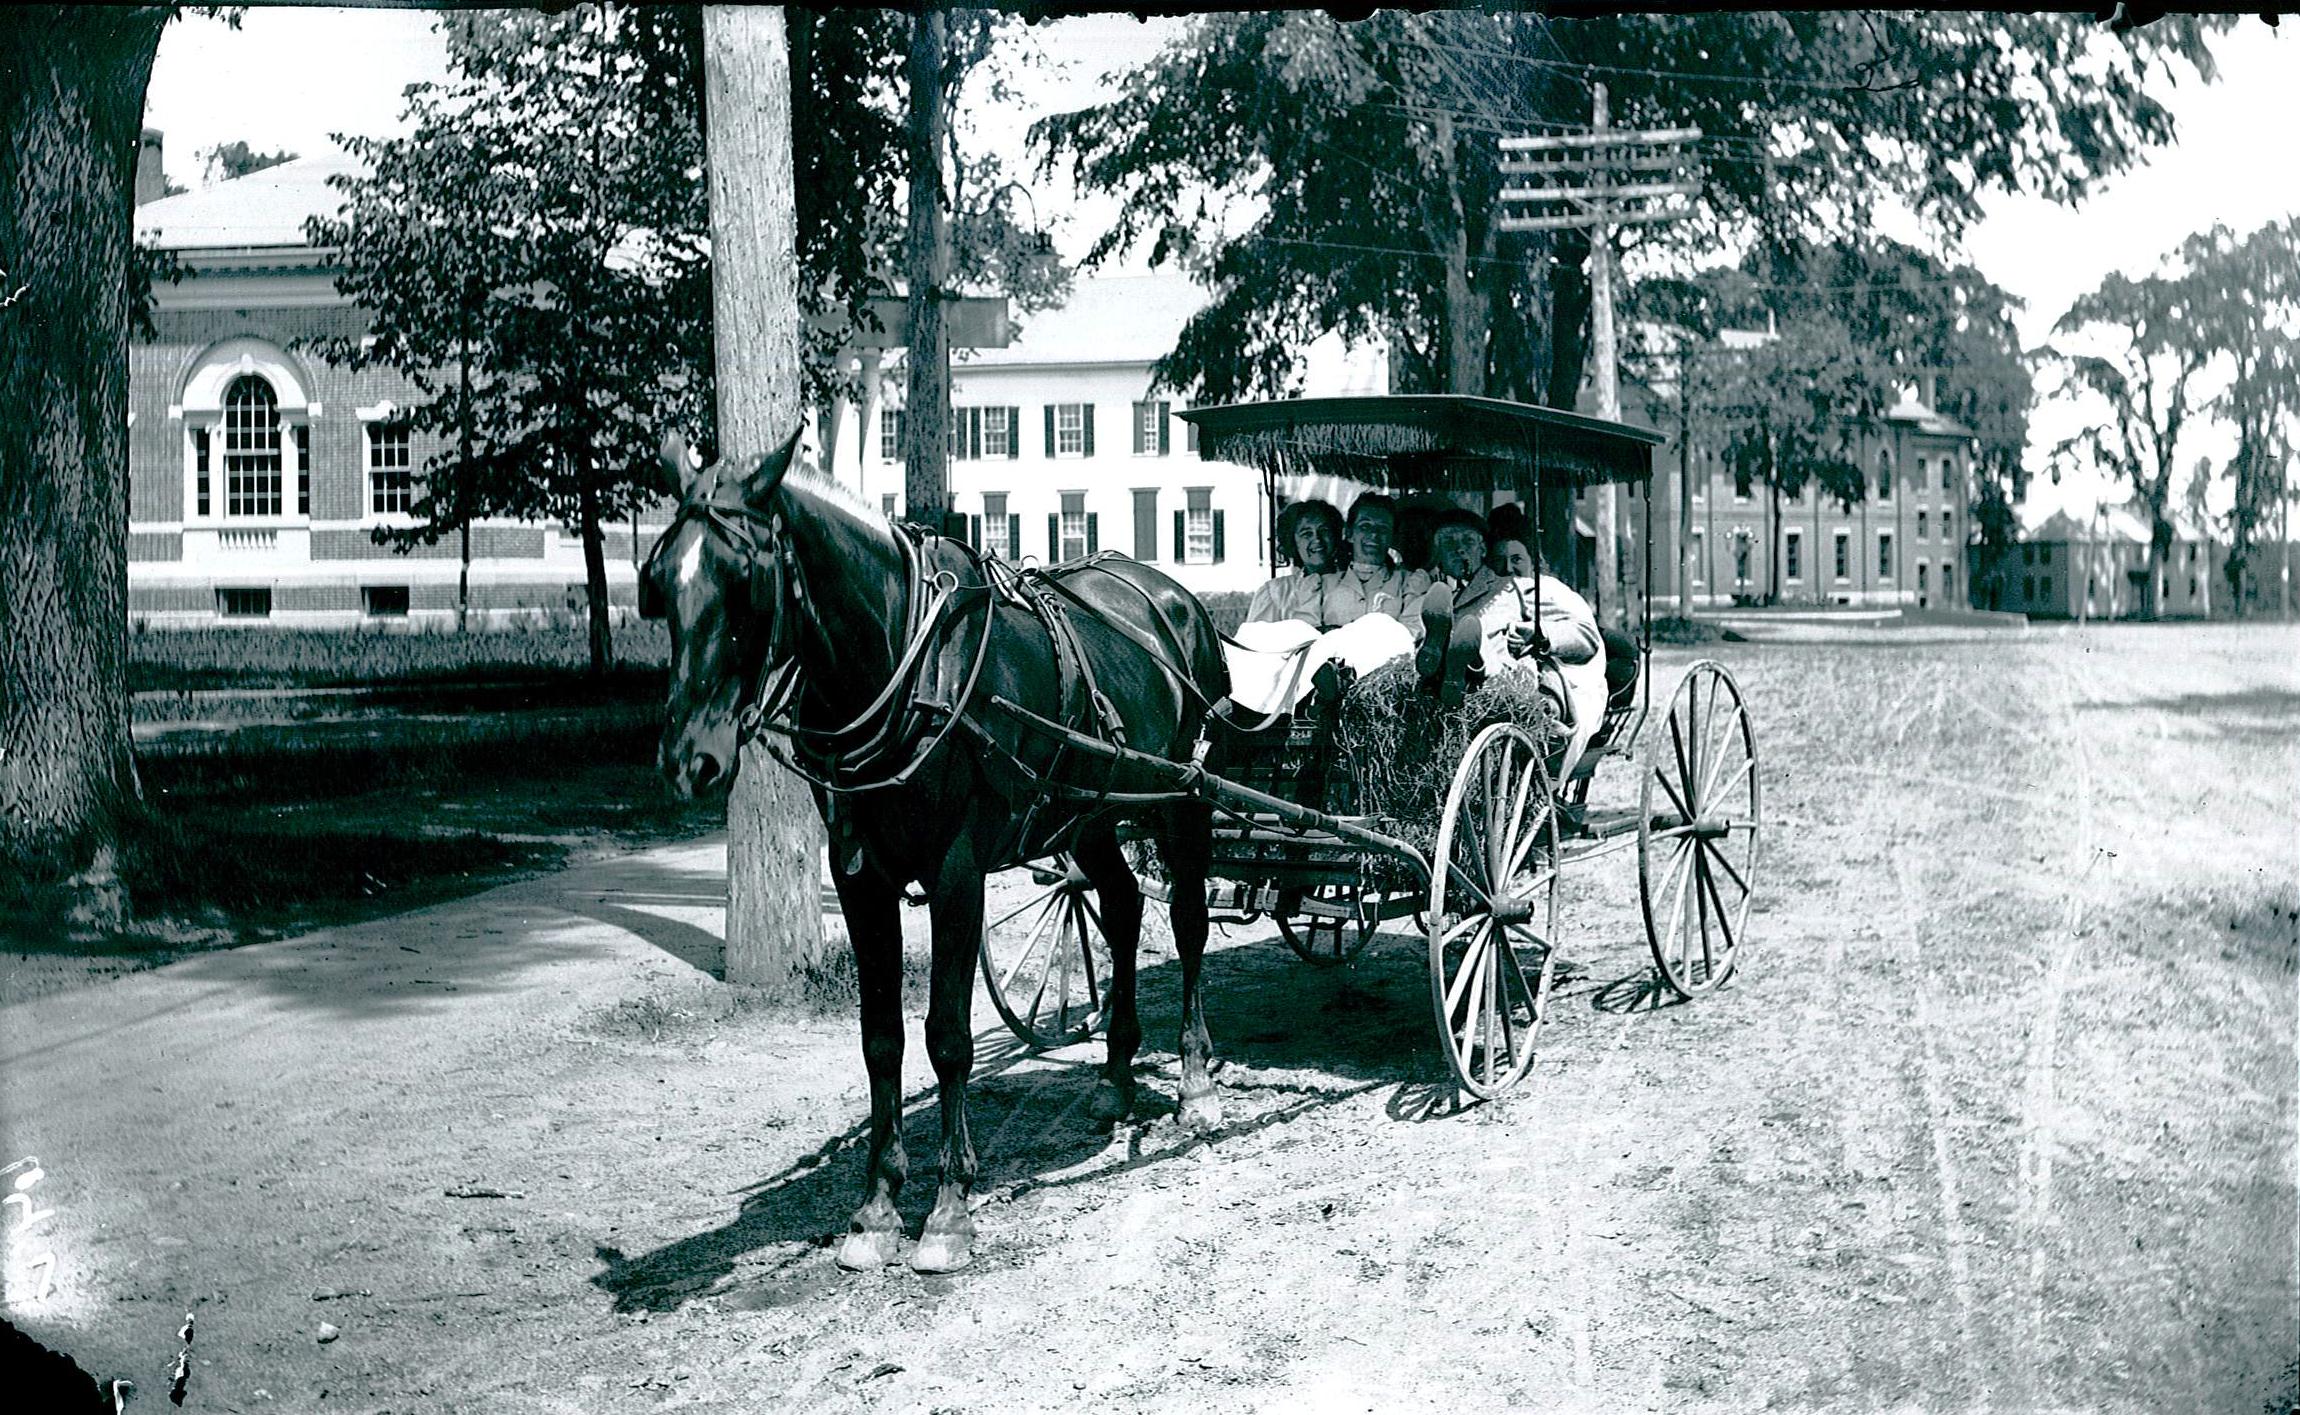 Horse and carriage on Main Street with Kennebunk Public Library and Unitarian Church in the background, c.1908